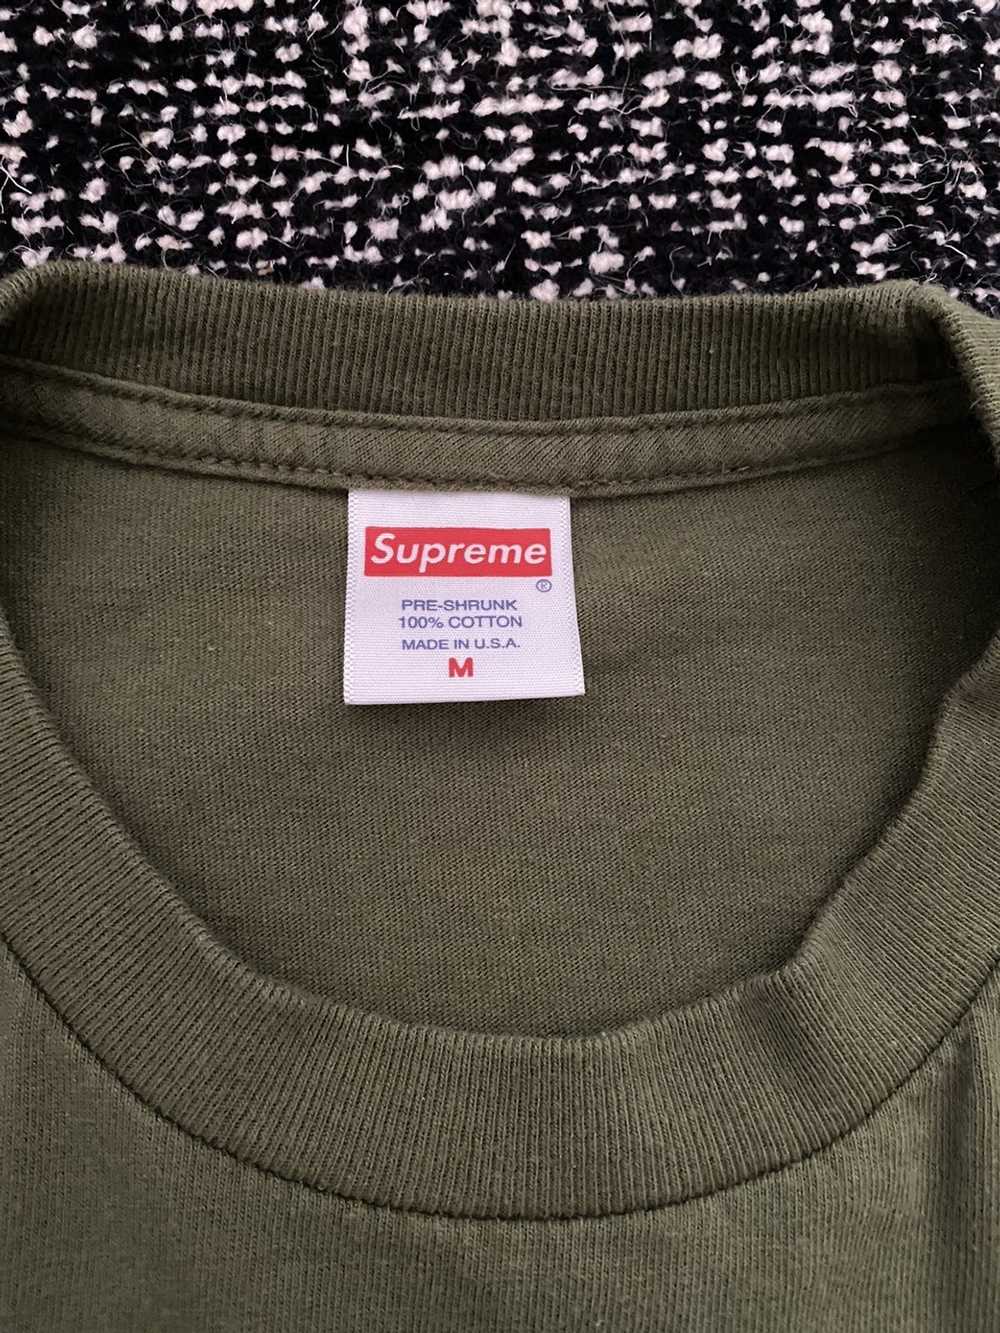 Supreme Supreme Cat in the Hat Olive Tee M - image 3